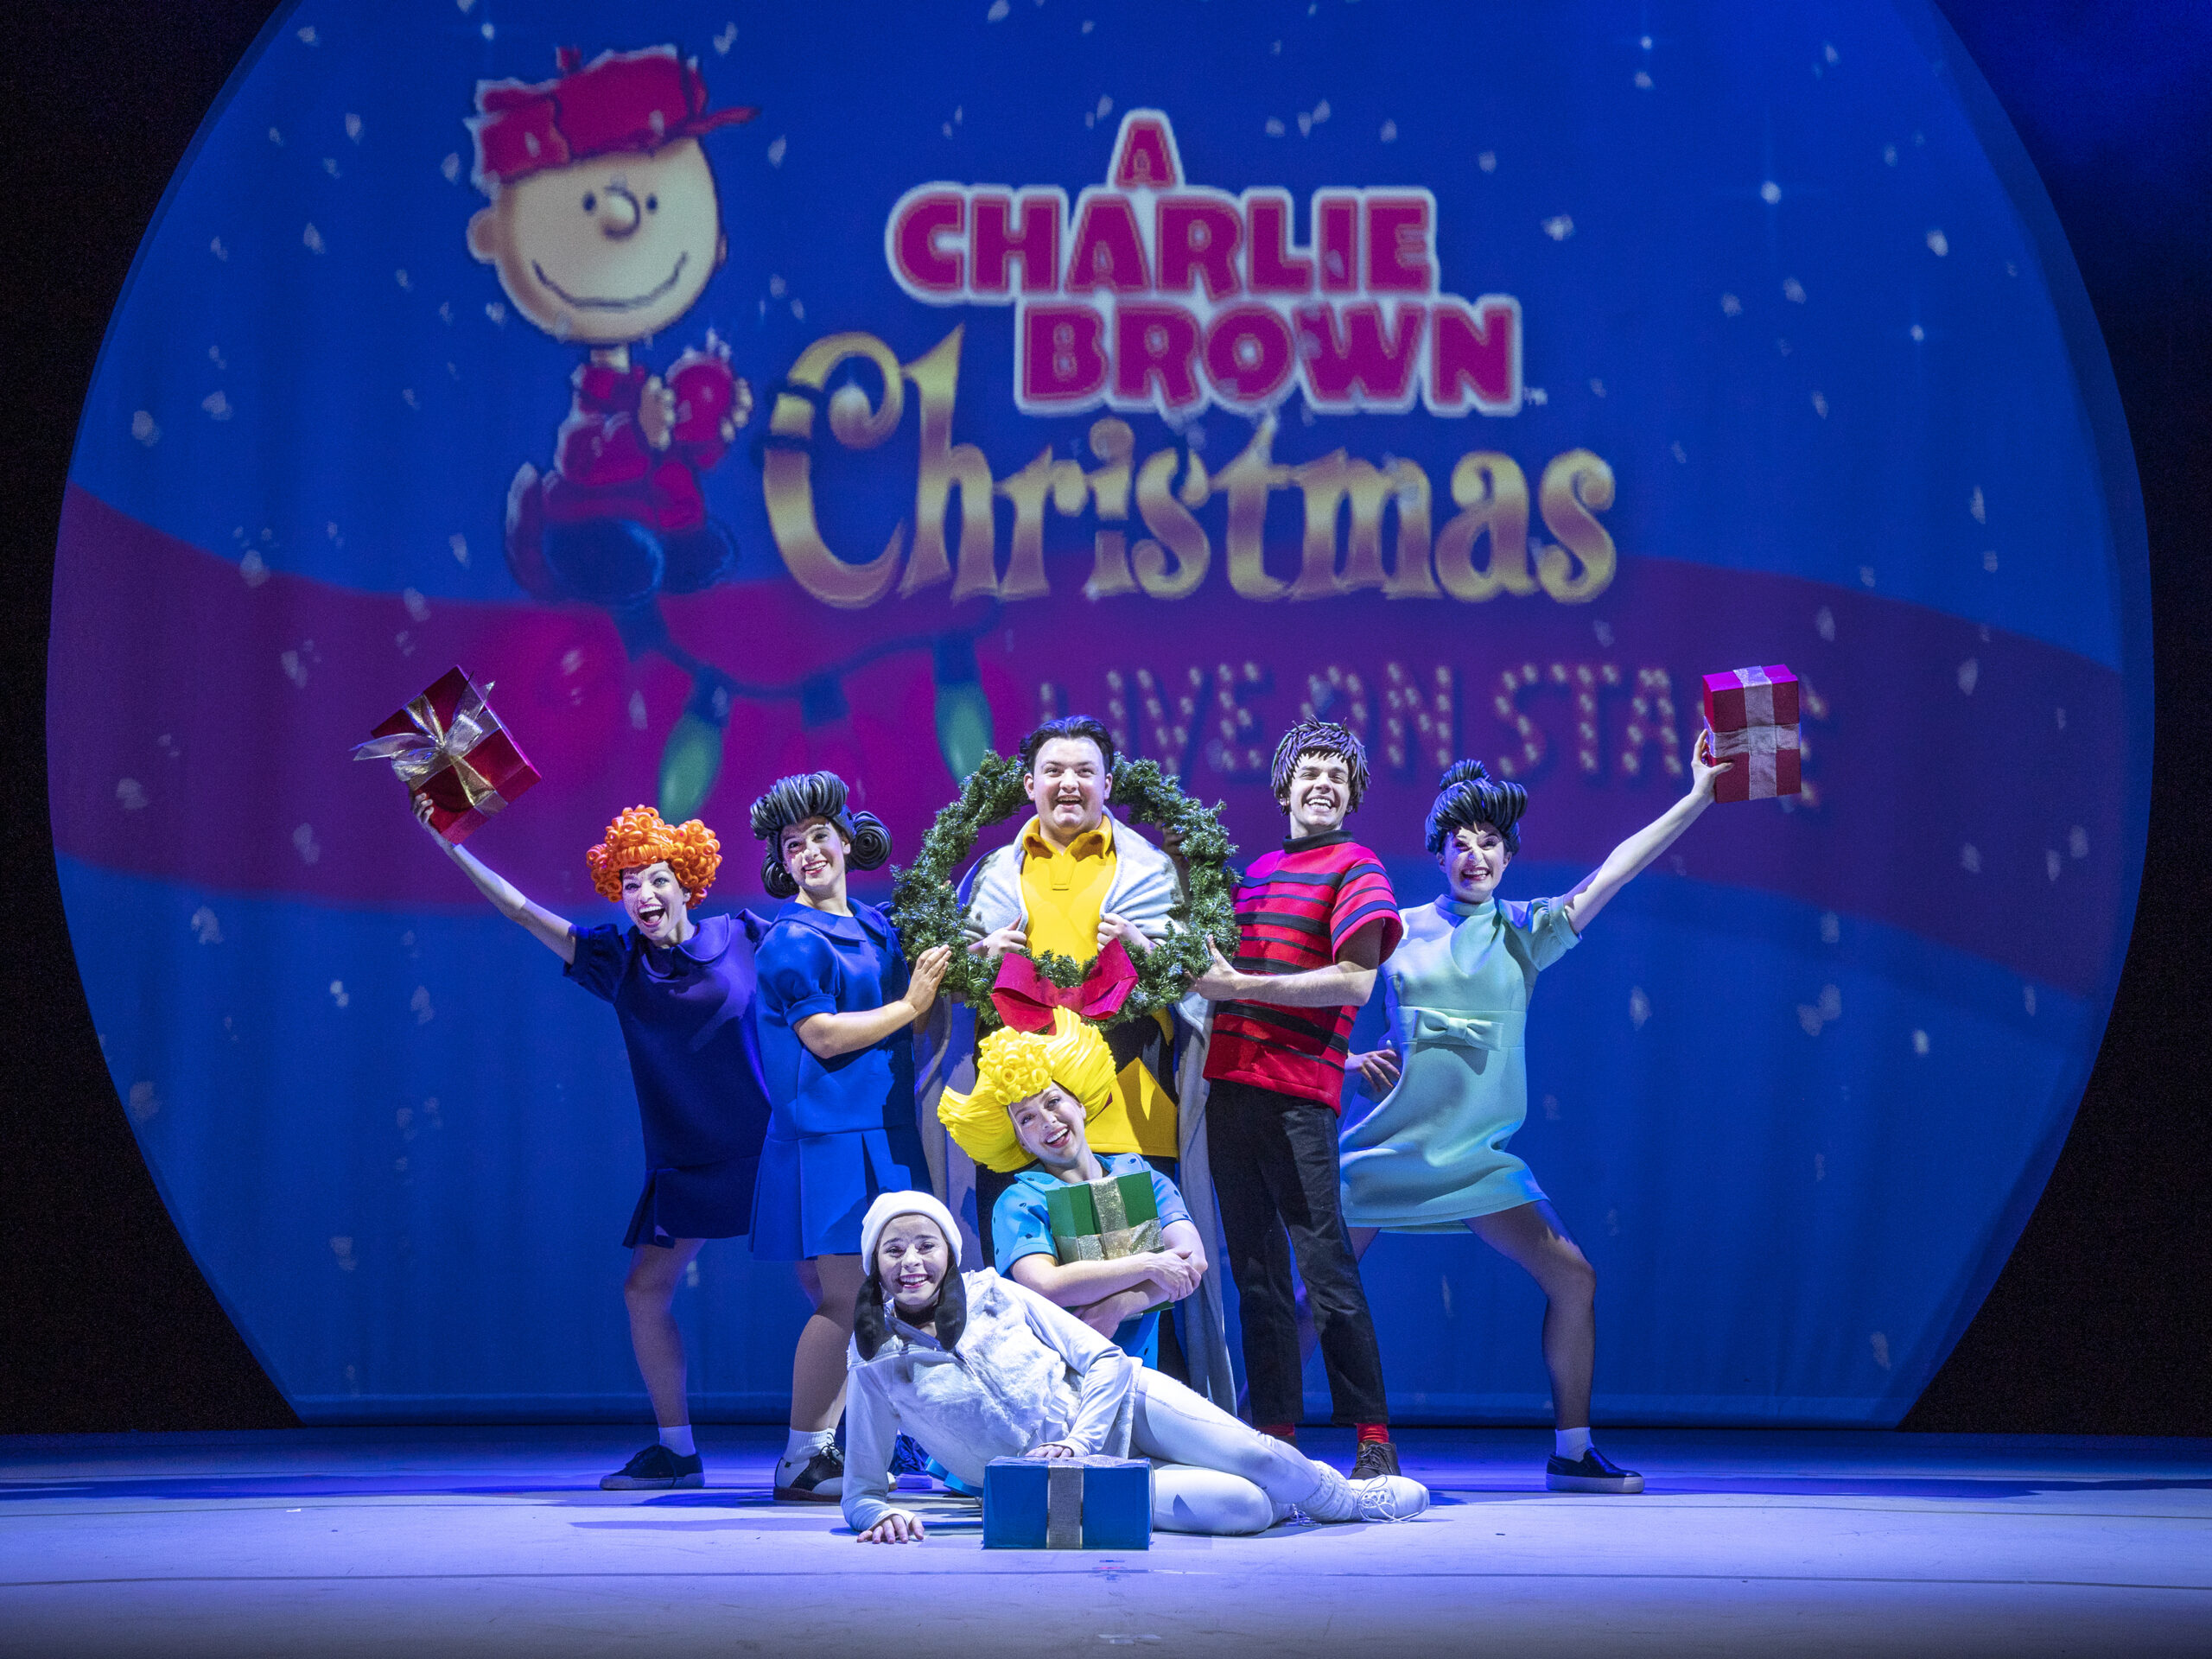 Get Your Tickets to "A Charlie Brown Christmas Live on Stage